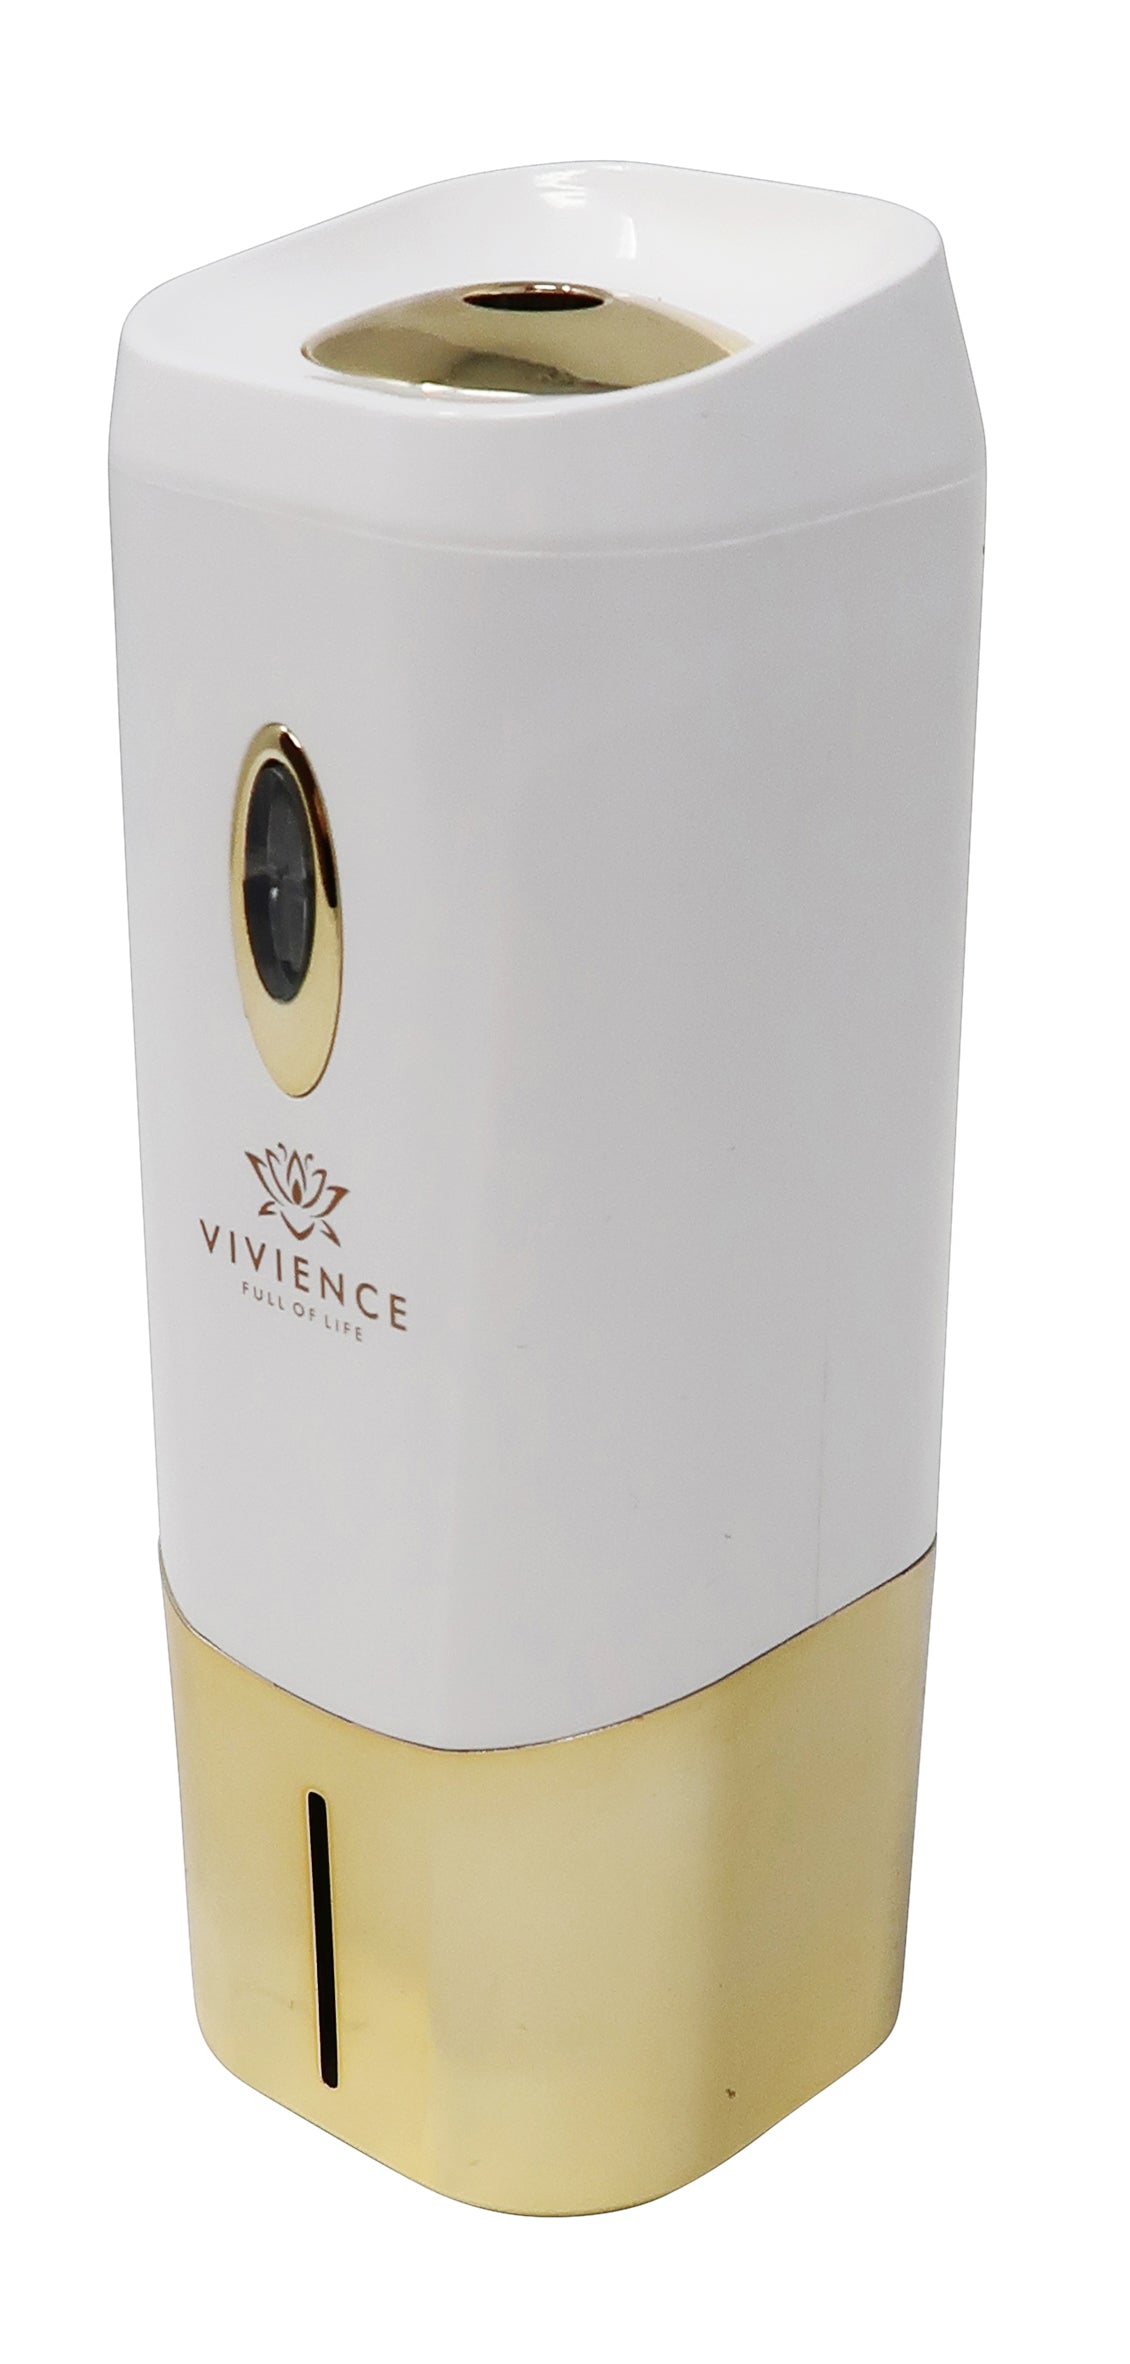 White and Gold Electronic Diffuser, "Zen Tea" Scent